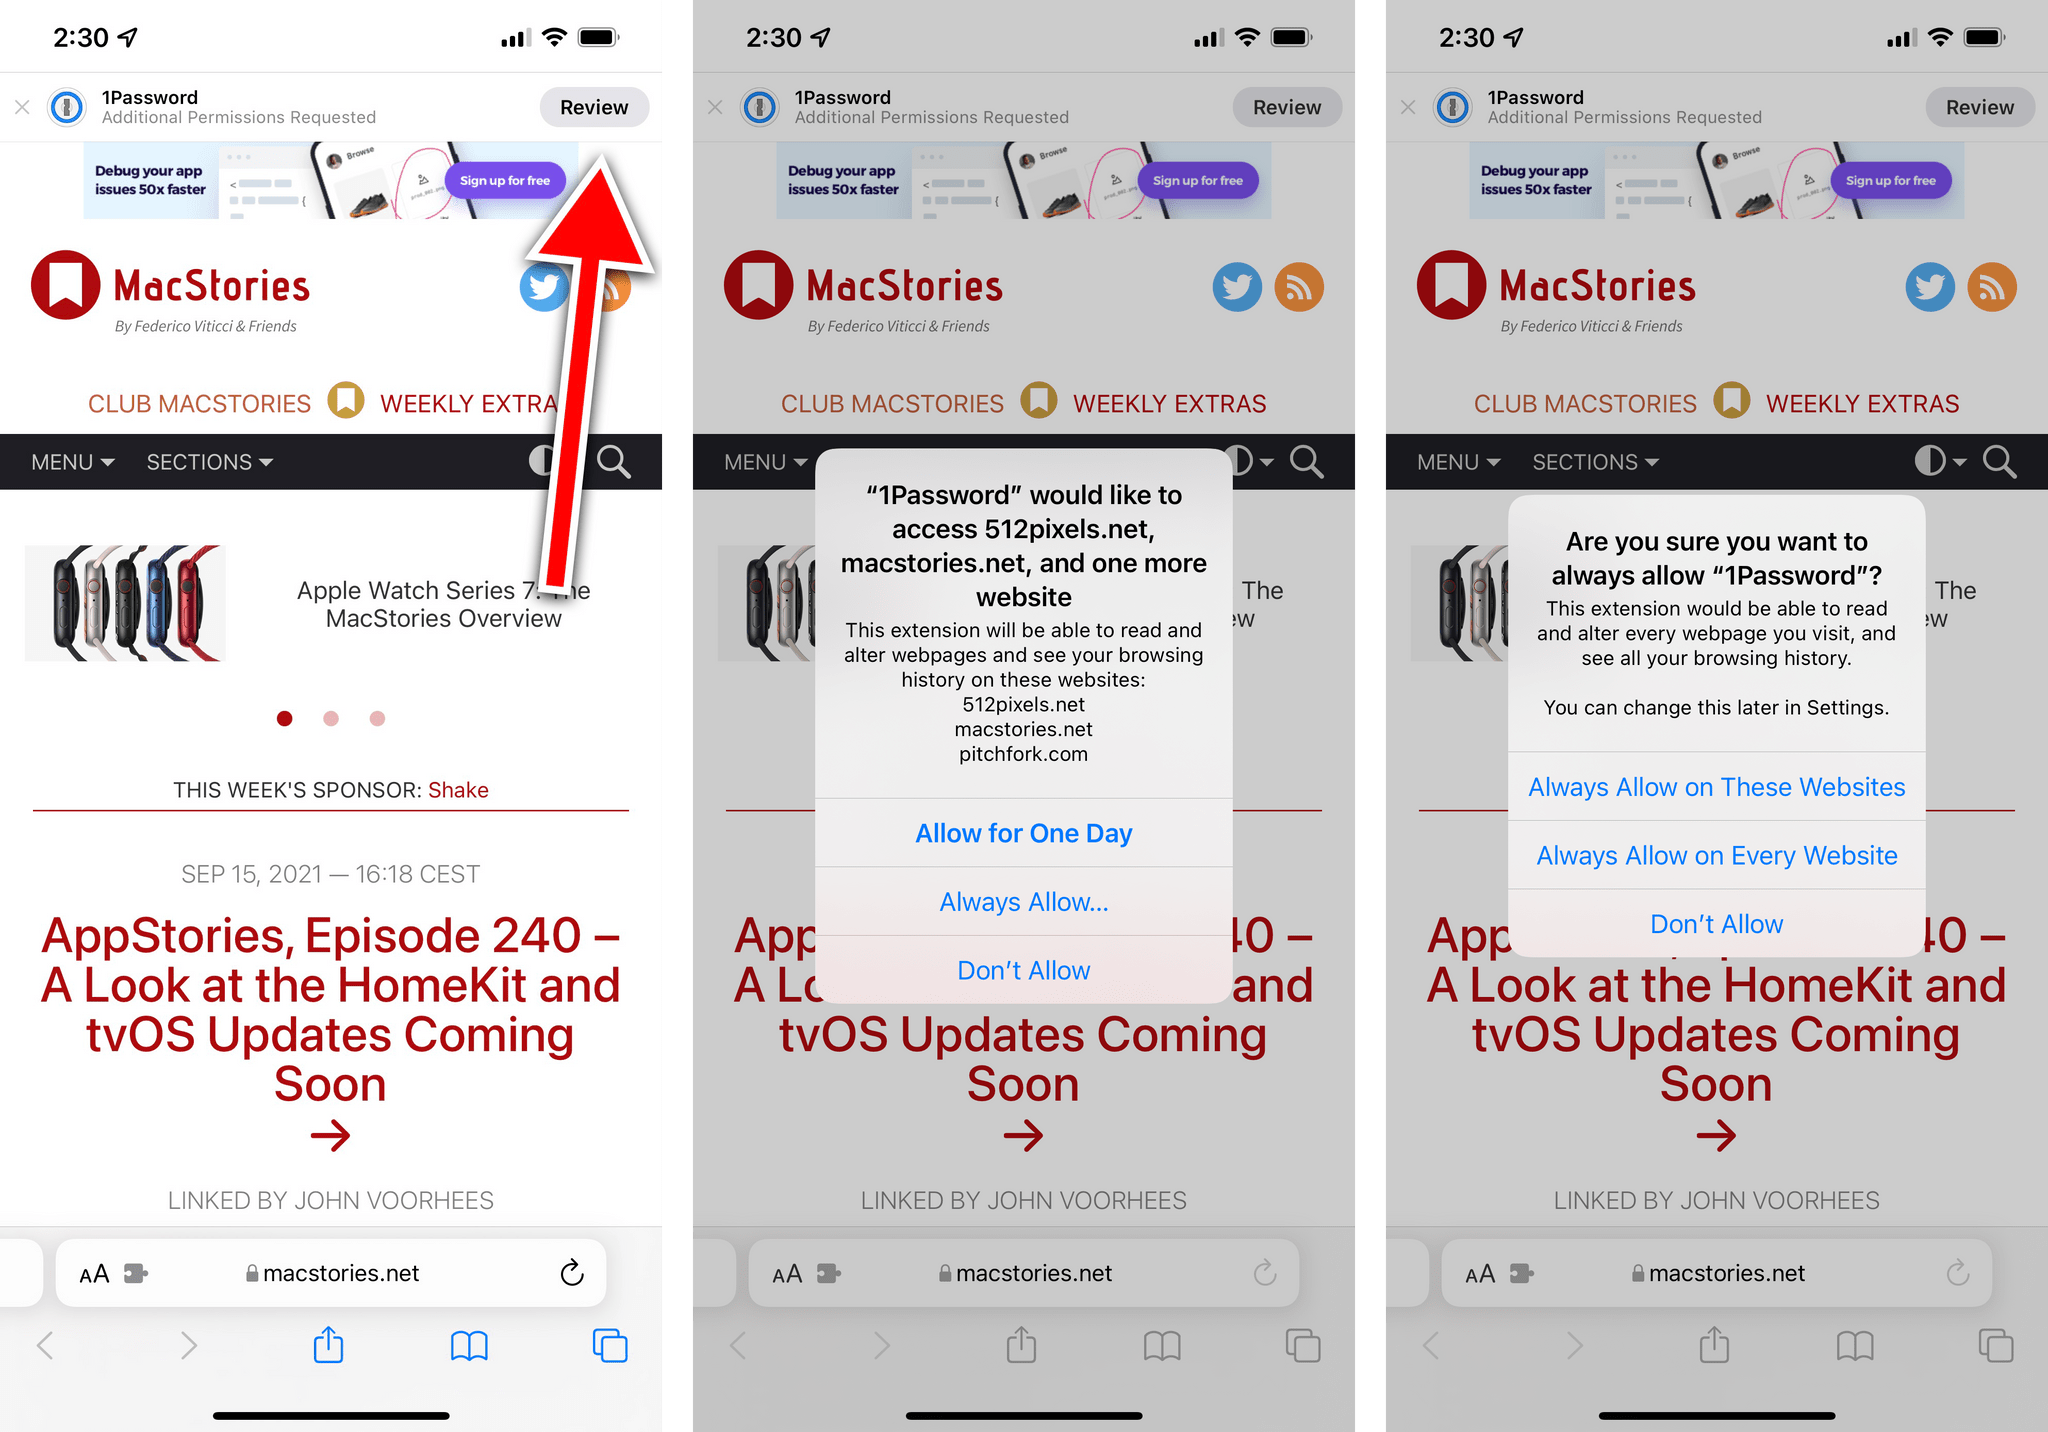 A typical permission flow for an extension running on iPhone.